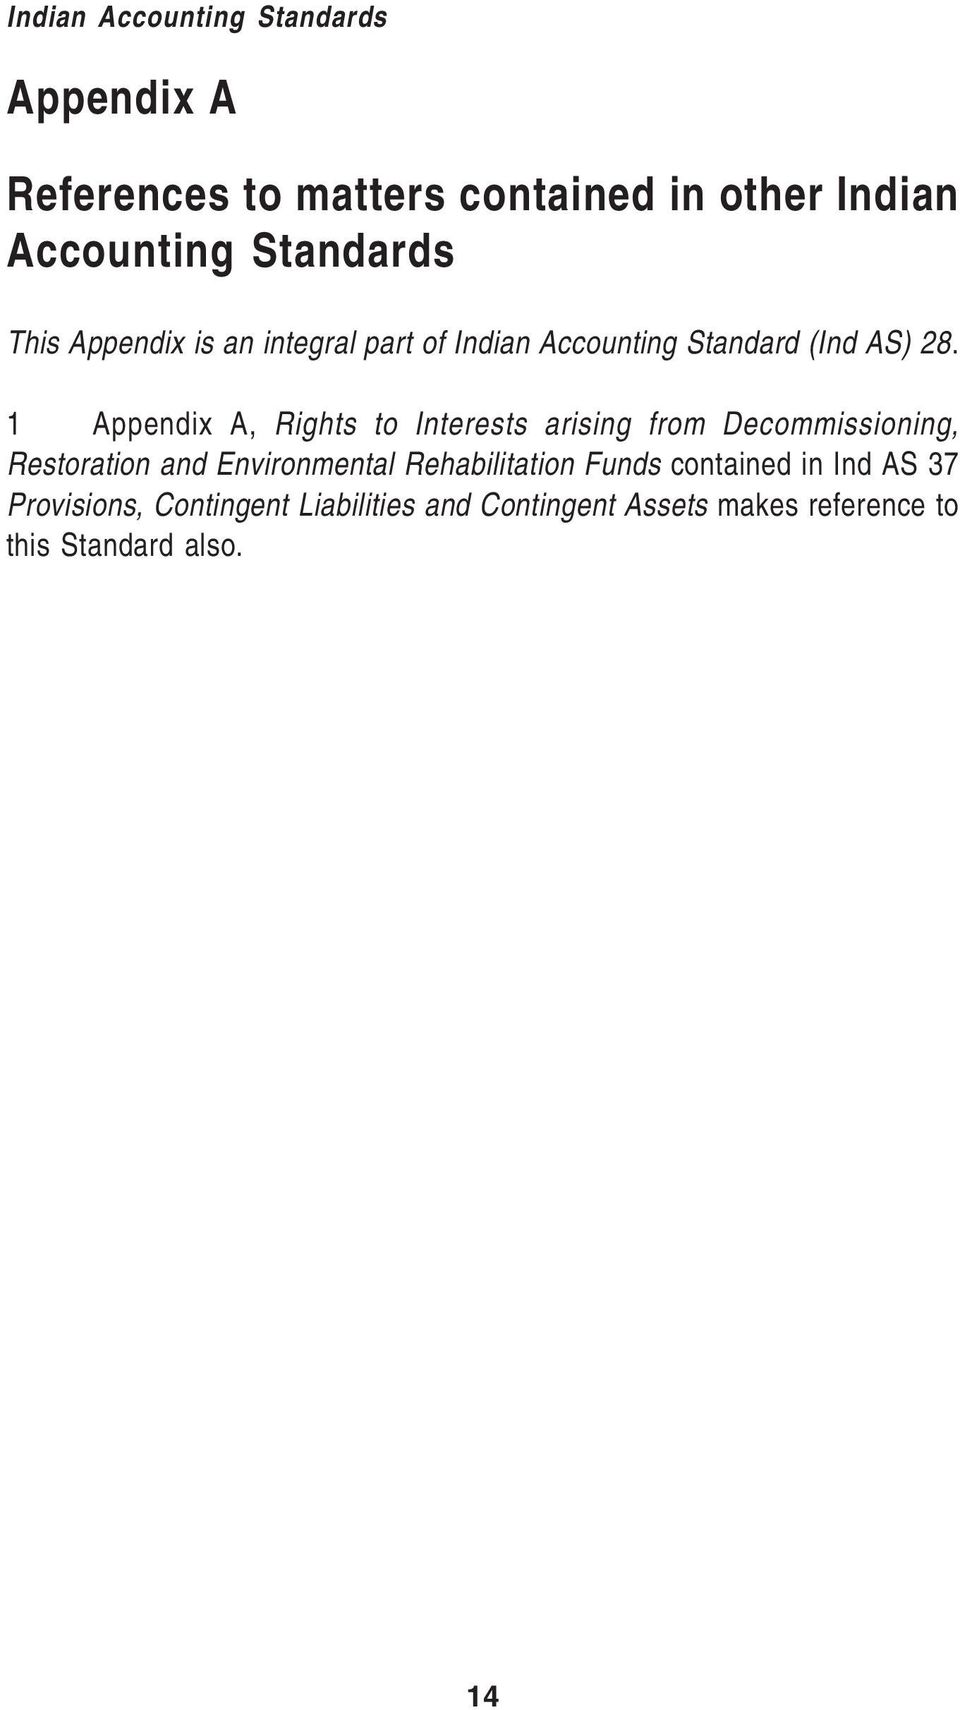 1 Appendix A, Rights to Interests arising from Decommissioning, Restoration and Environmental